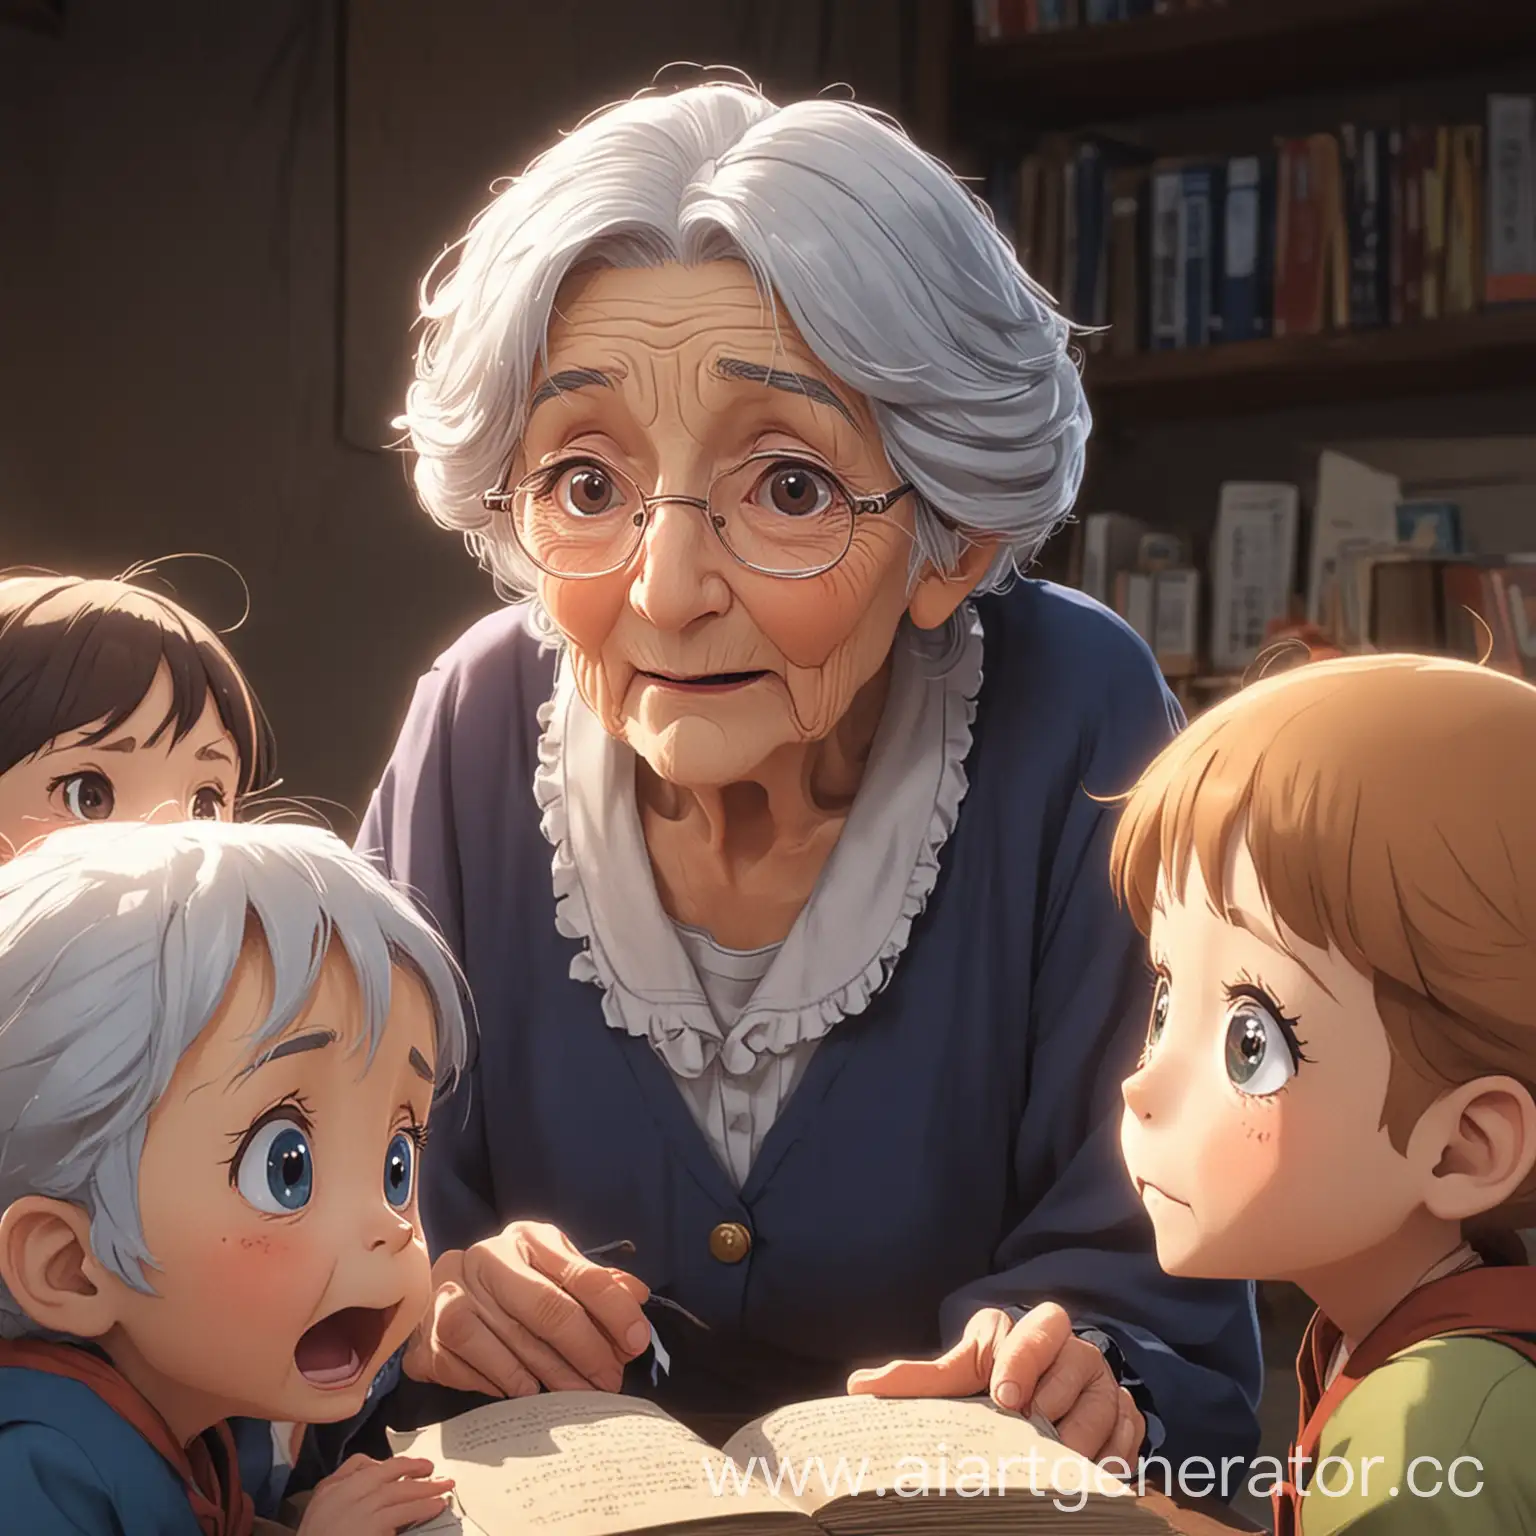 Anime-Style-Storytelling-Elderly-Woman-Engages-Children-with-Tales